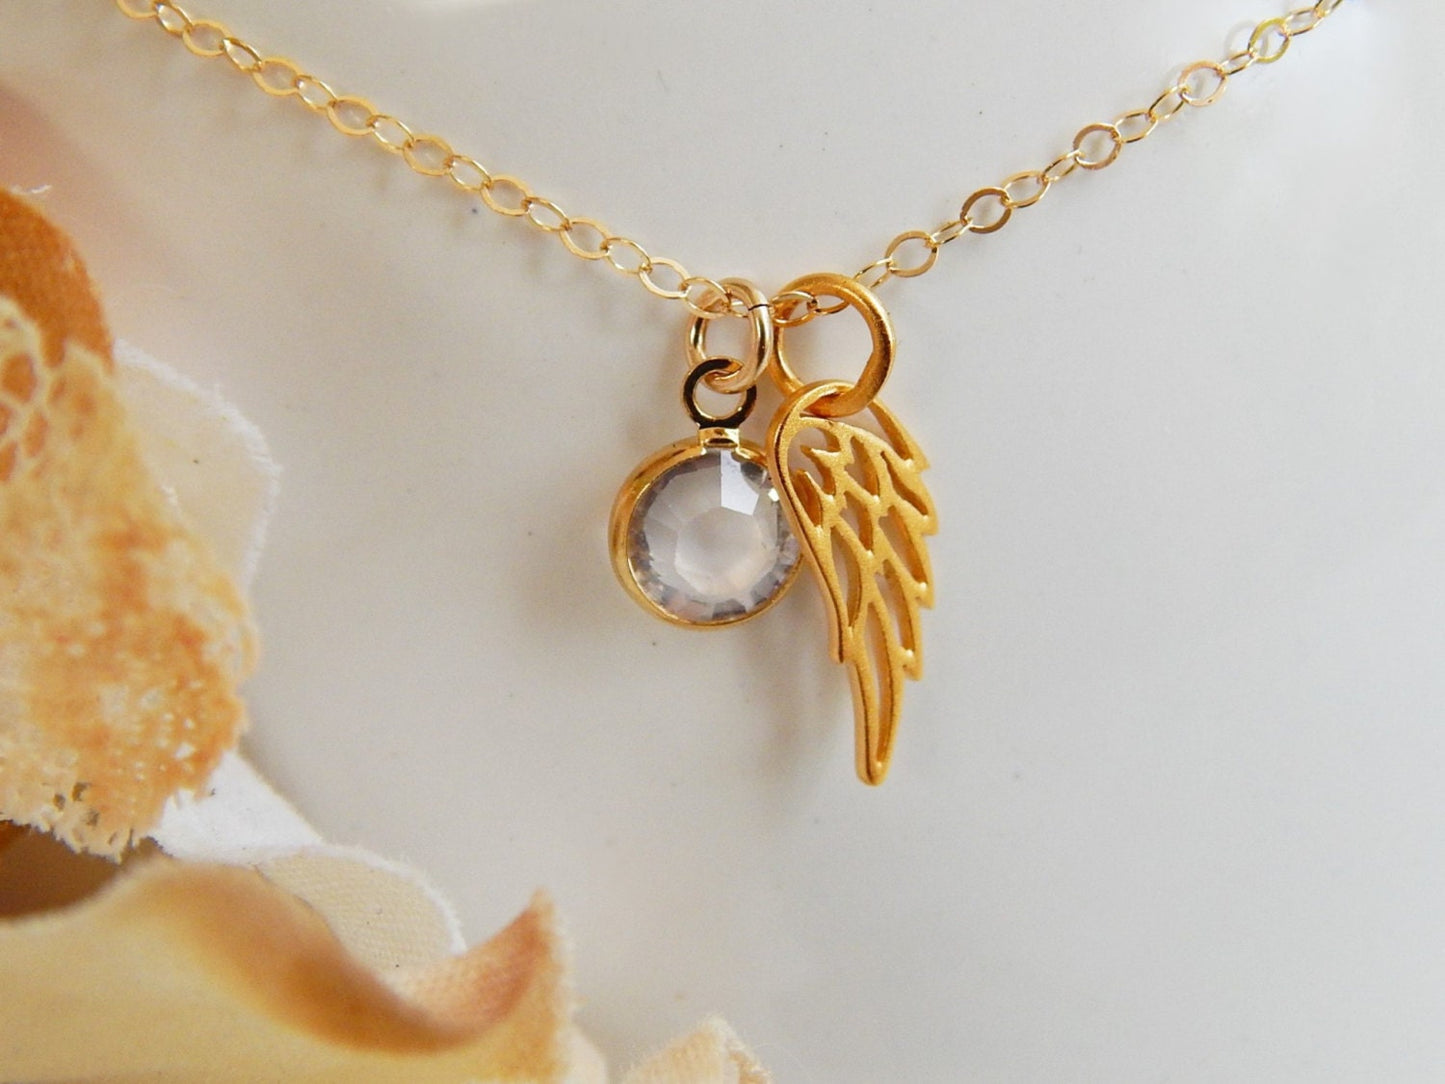 Angel wing charm hanging next to a swarovski birthstone charm on a gold necklace chain.